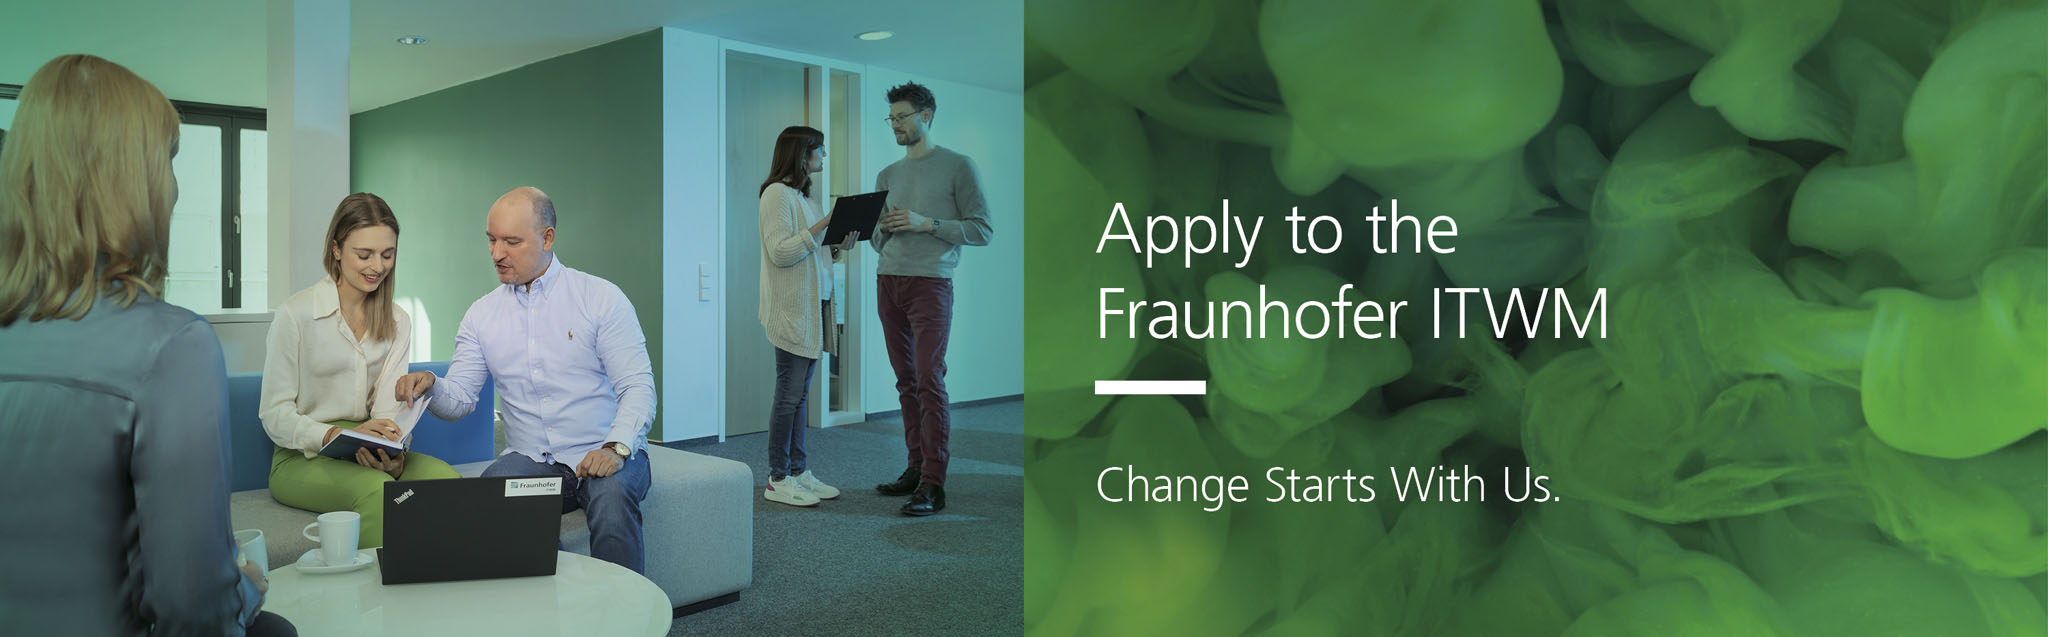 Apply to the Fraunhofer ITWM